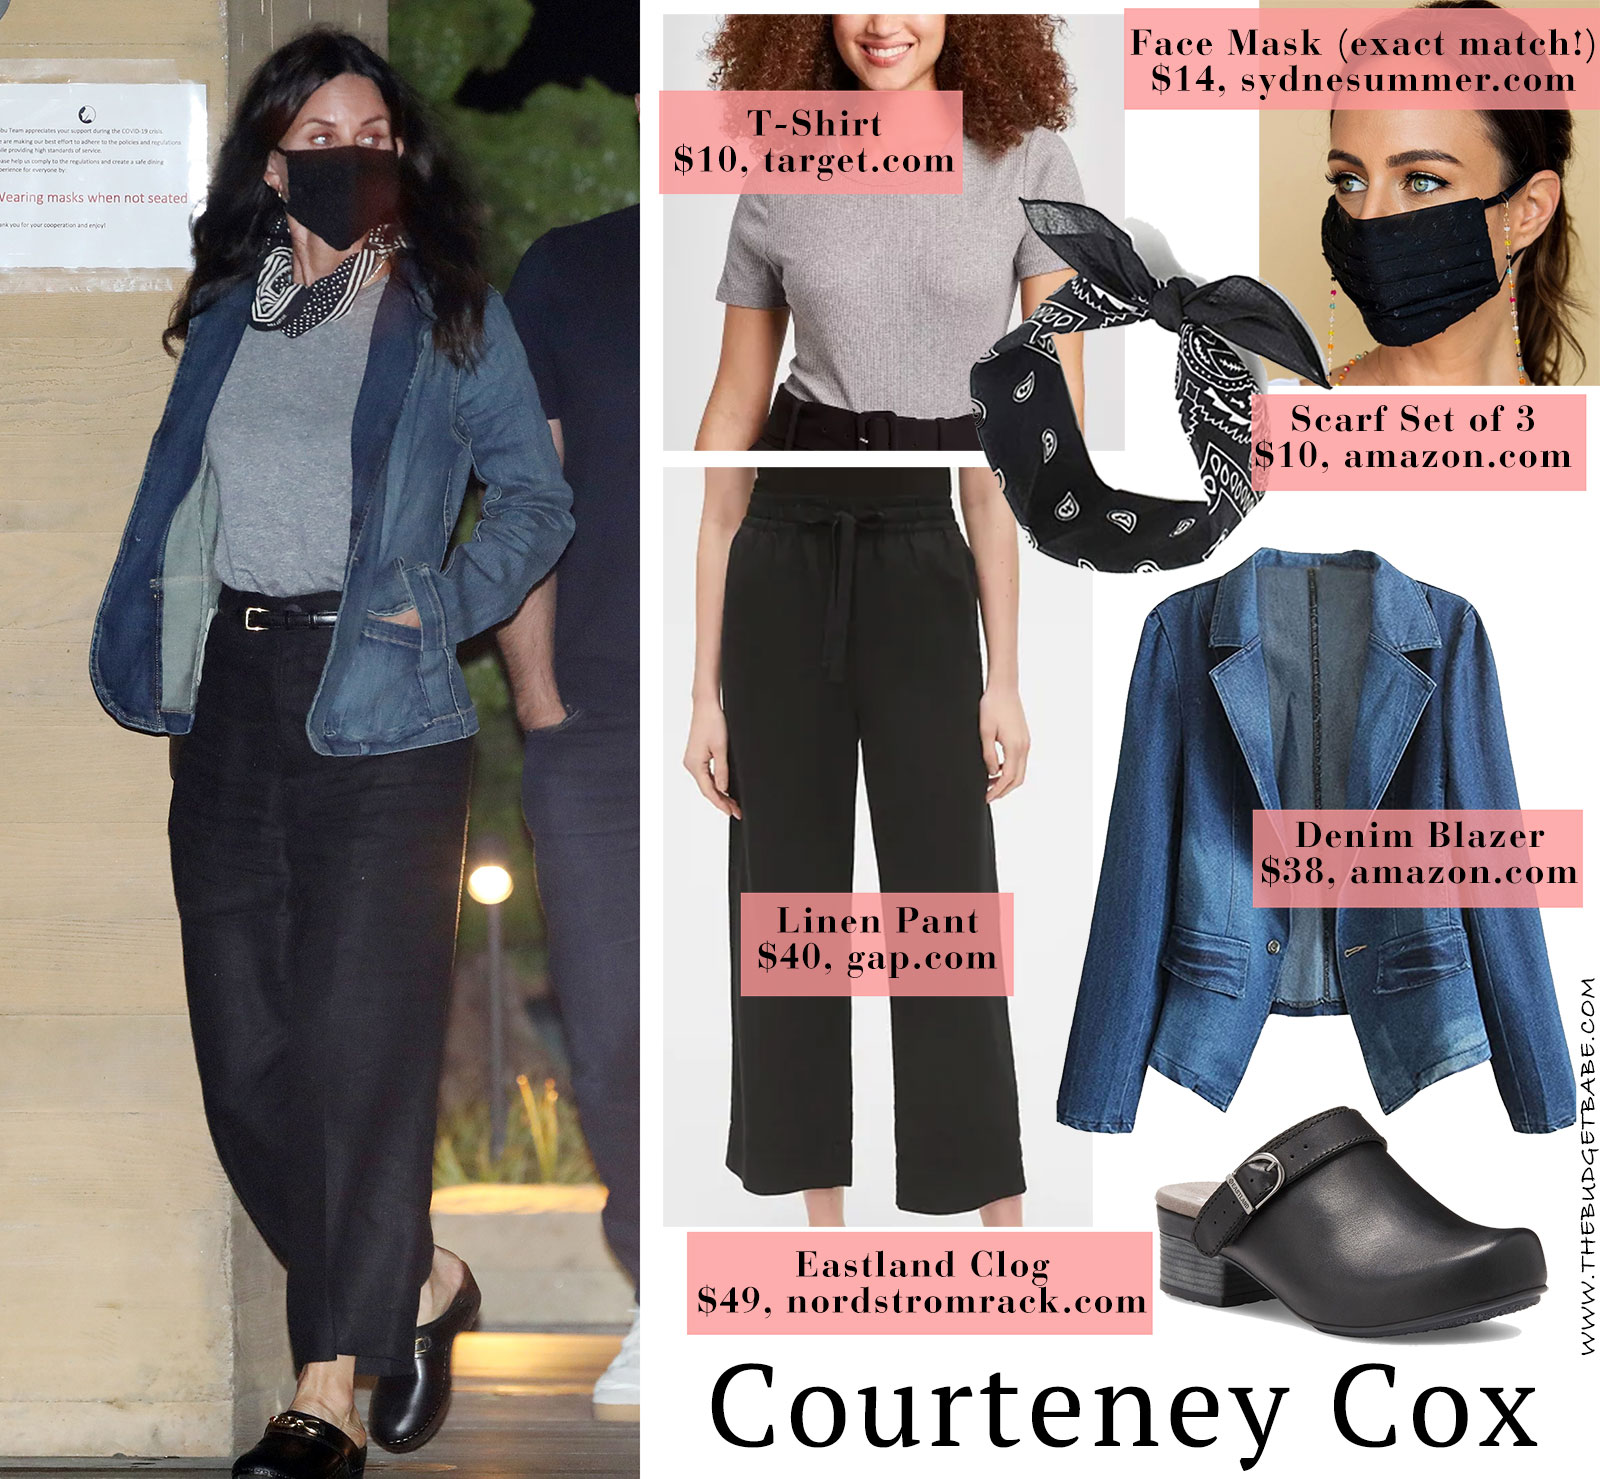 Courteney Cox wears Sydne Summer face mask while out and about